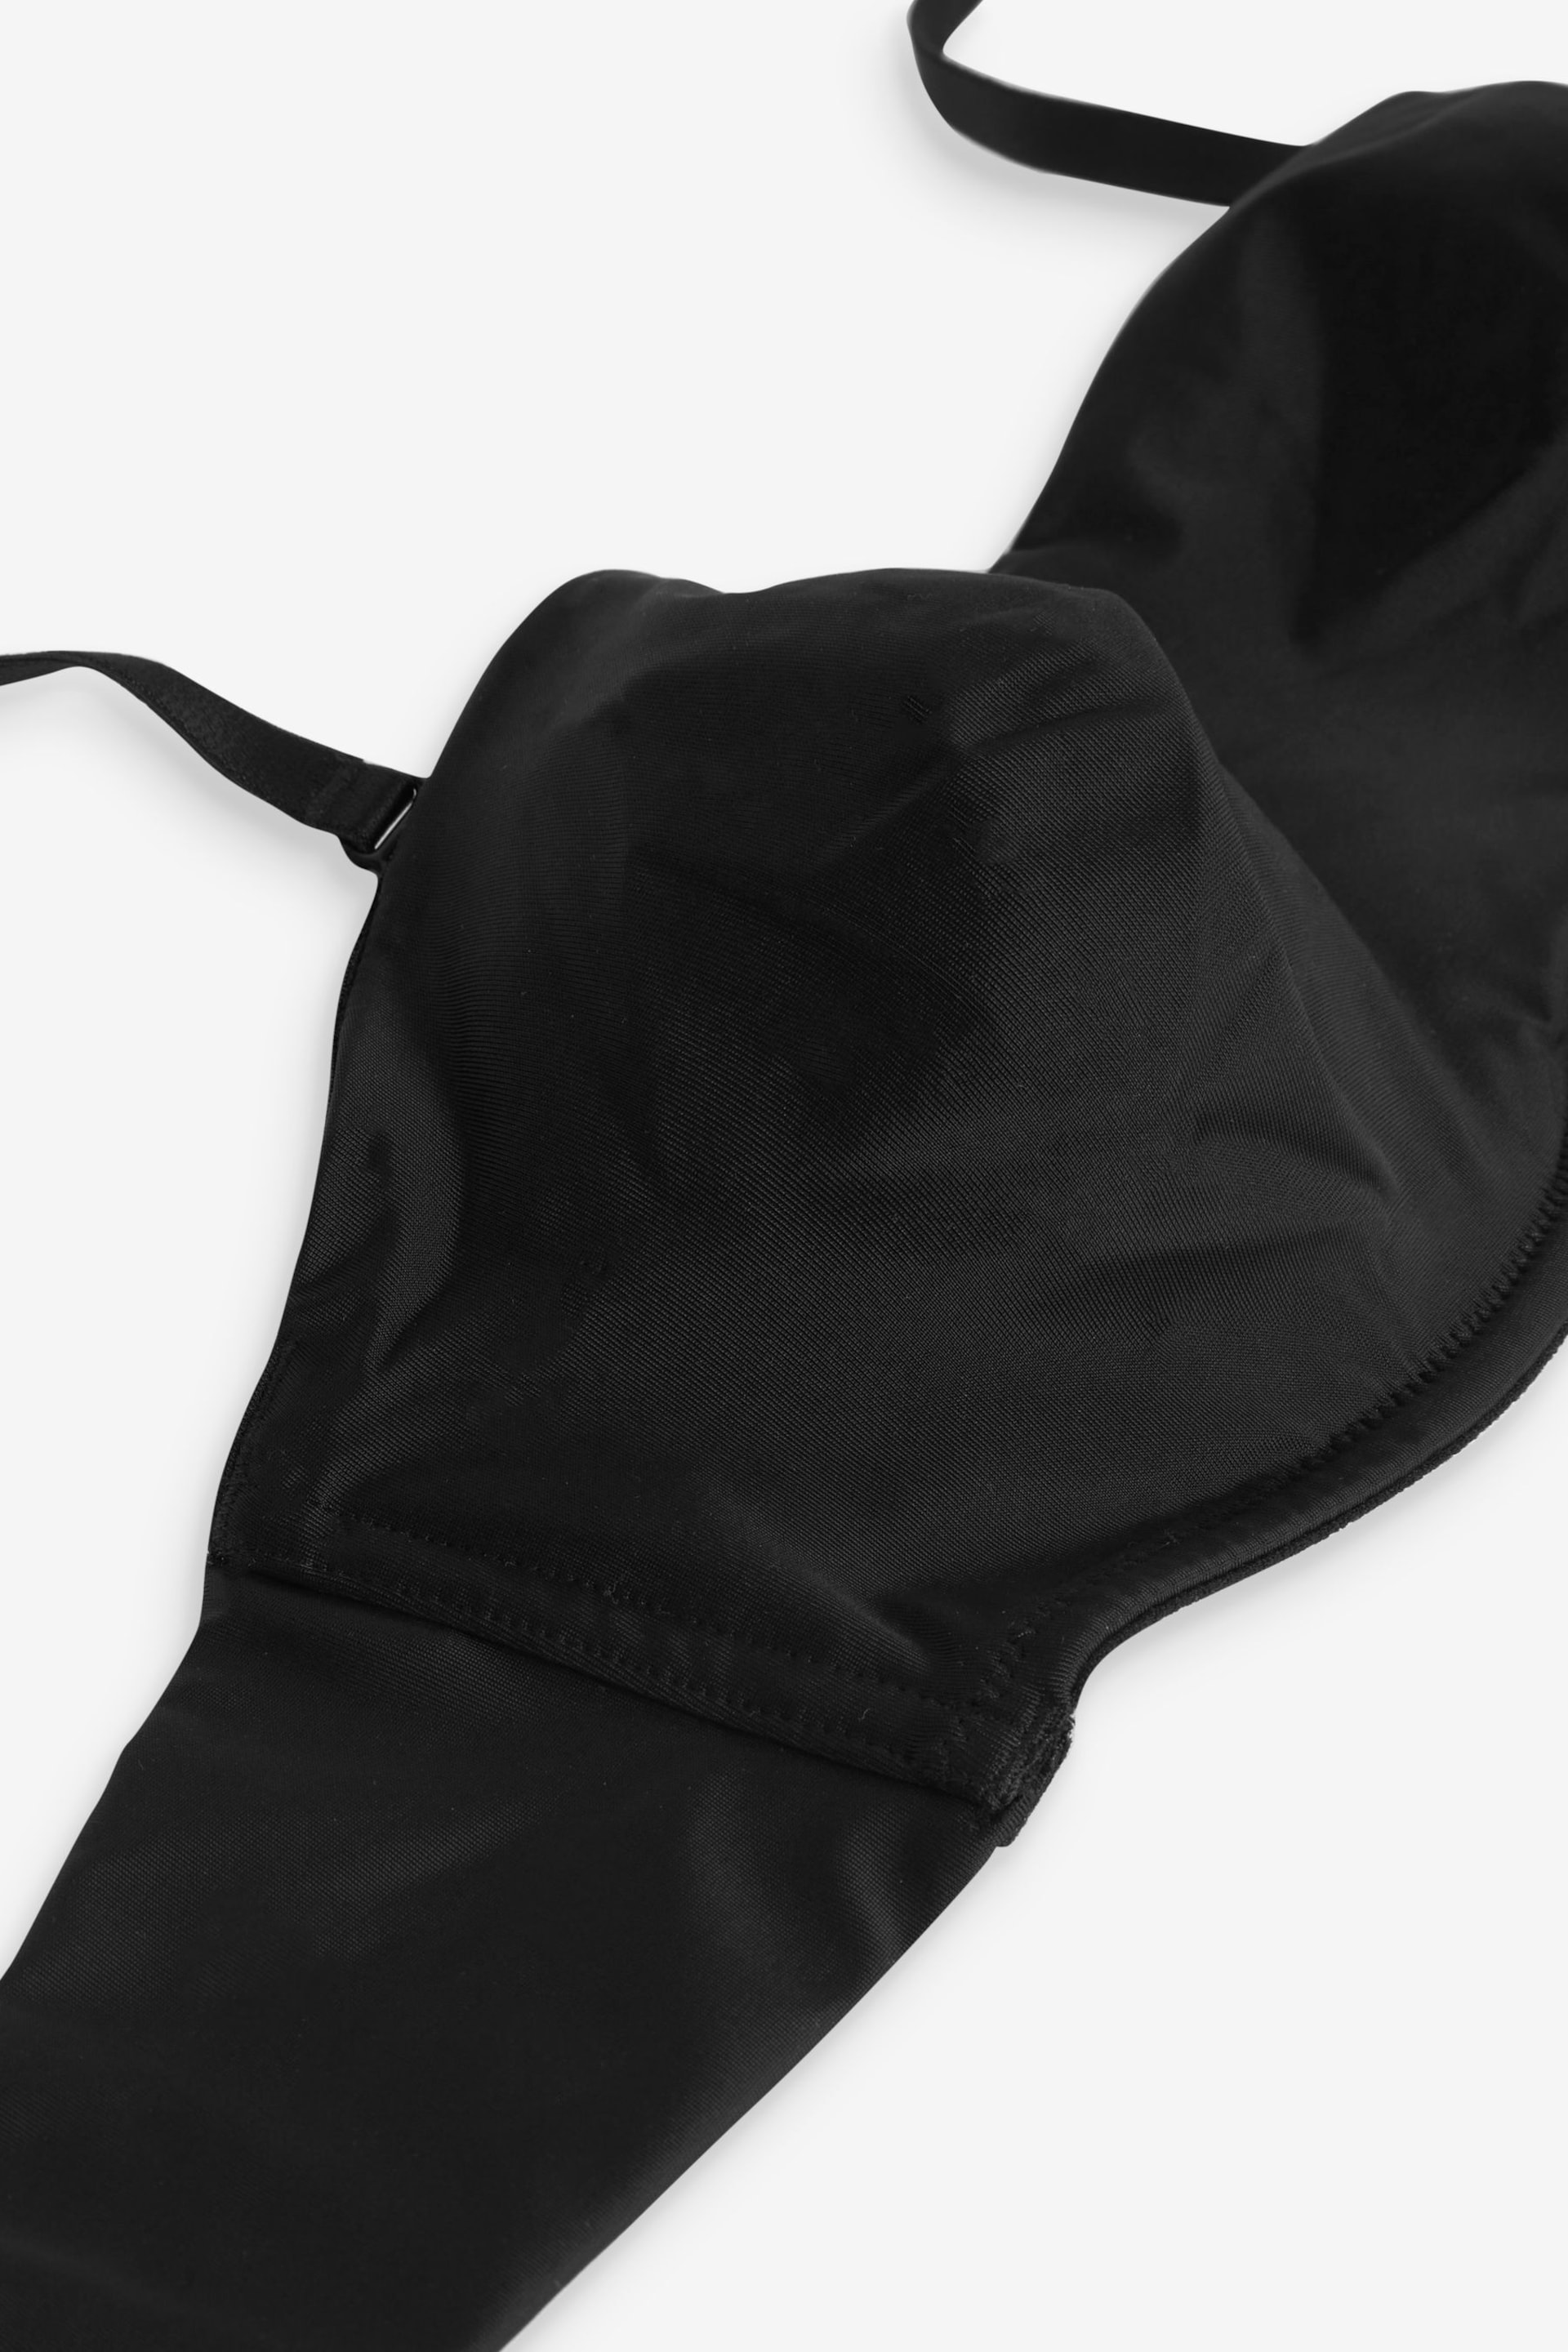 Black Smoothing Strapless Non Pad Wired Bra - Image 6 of 6